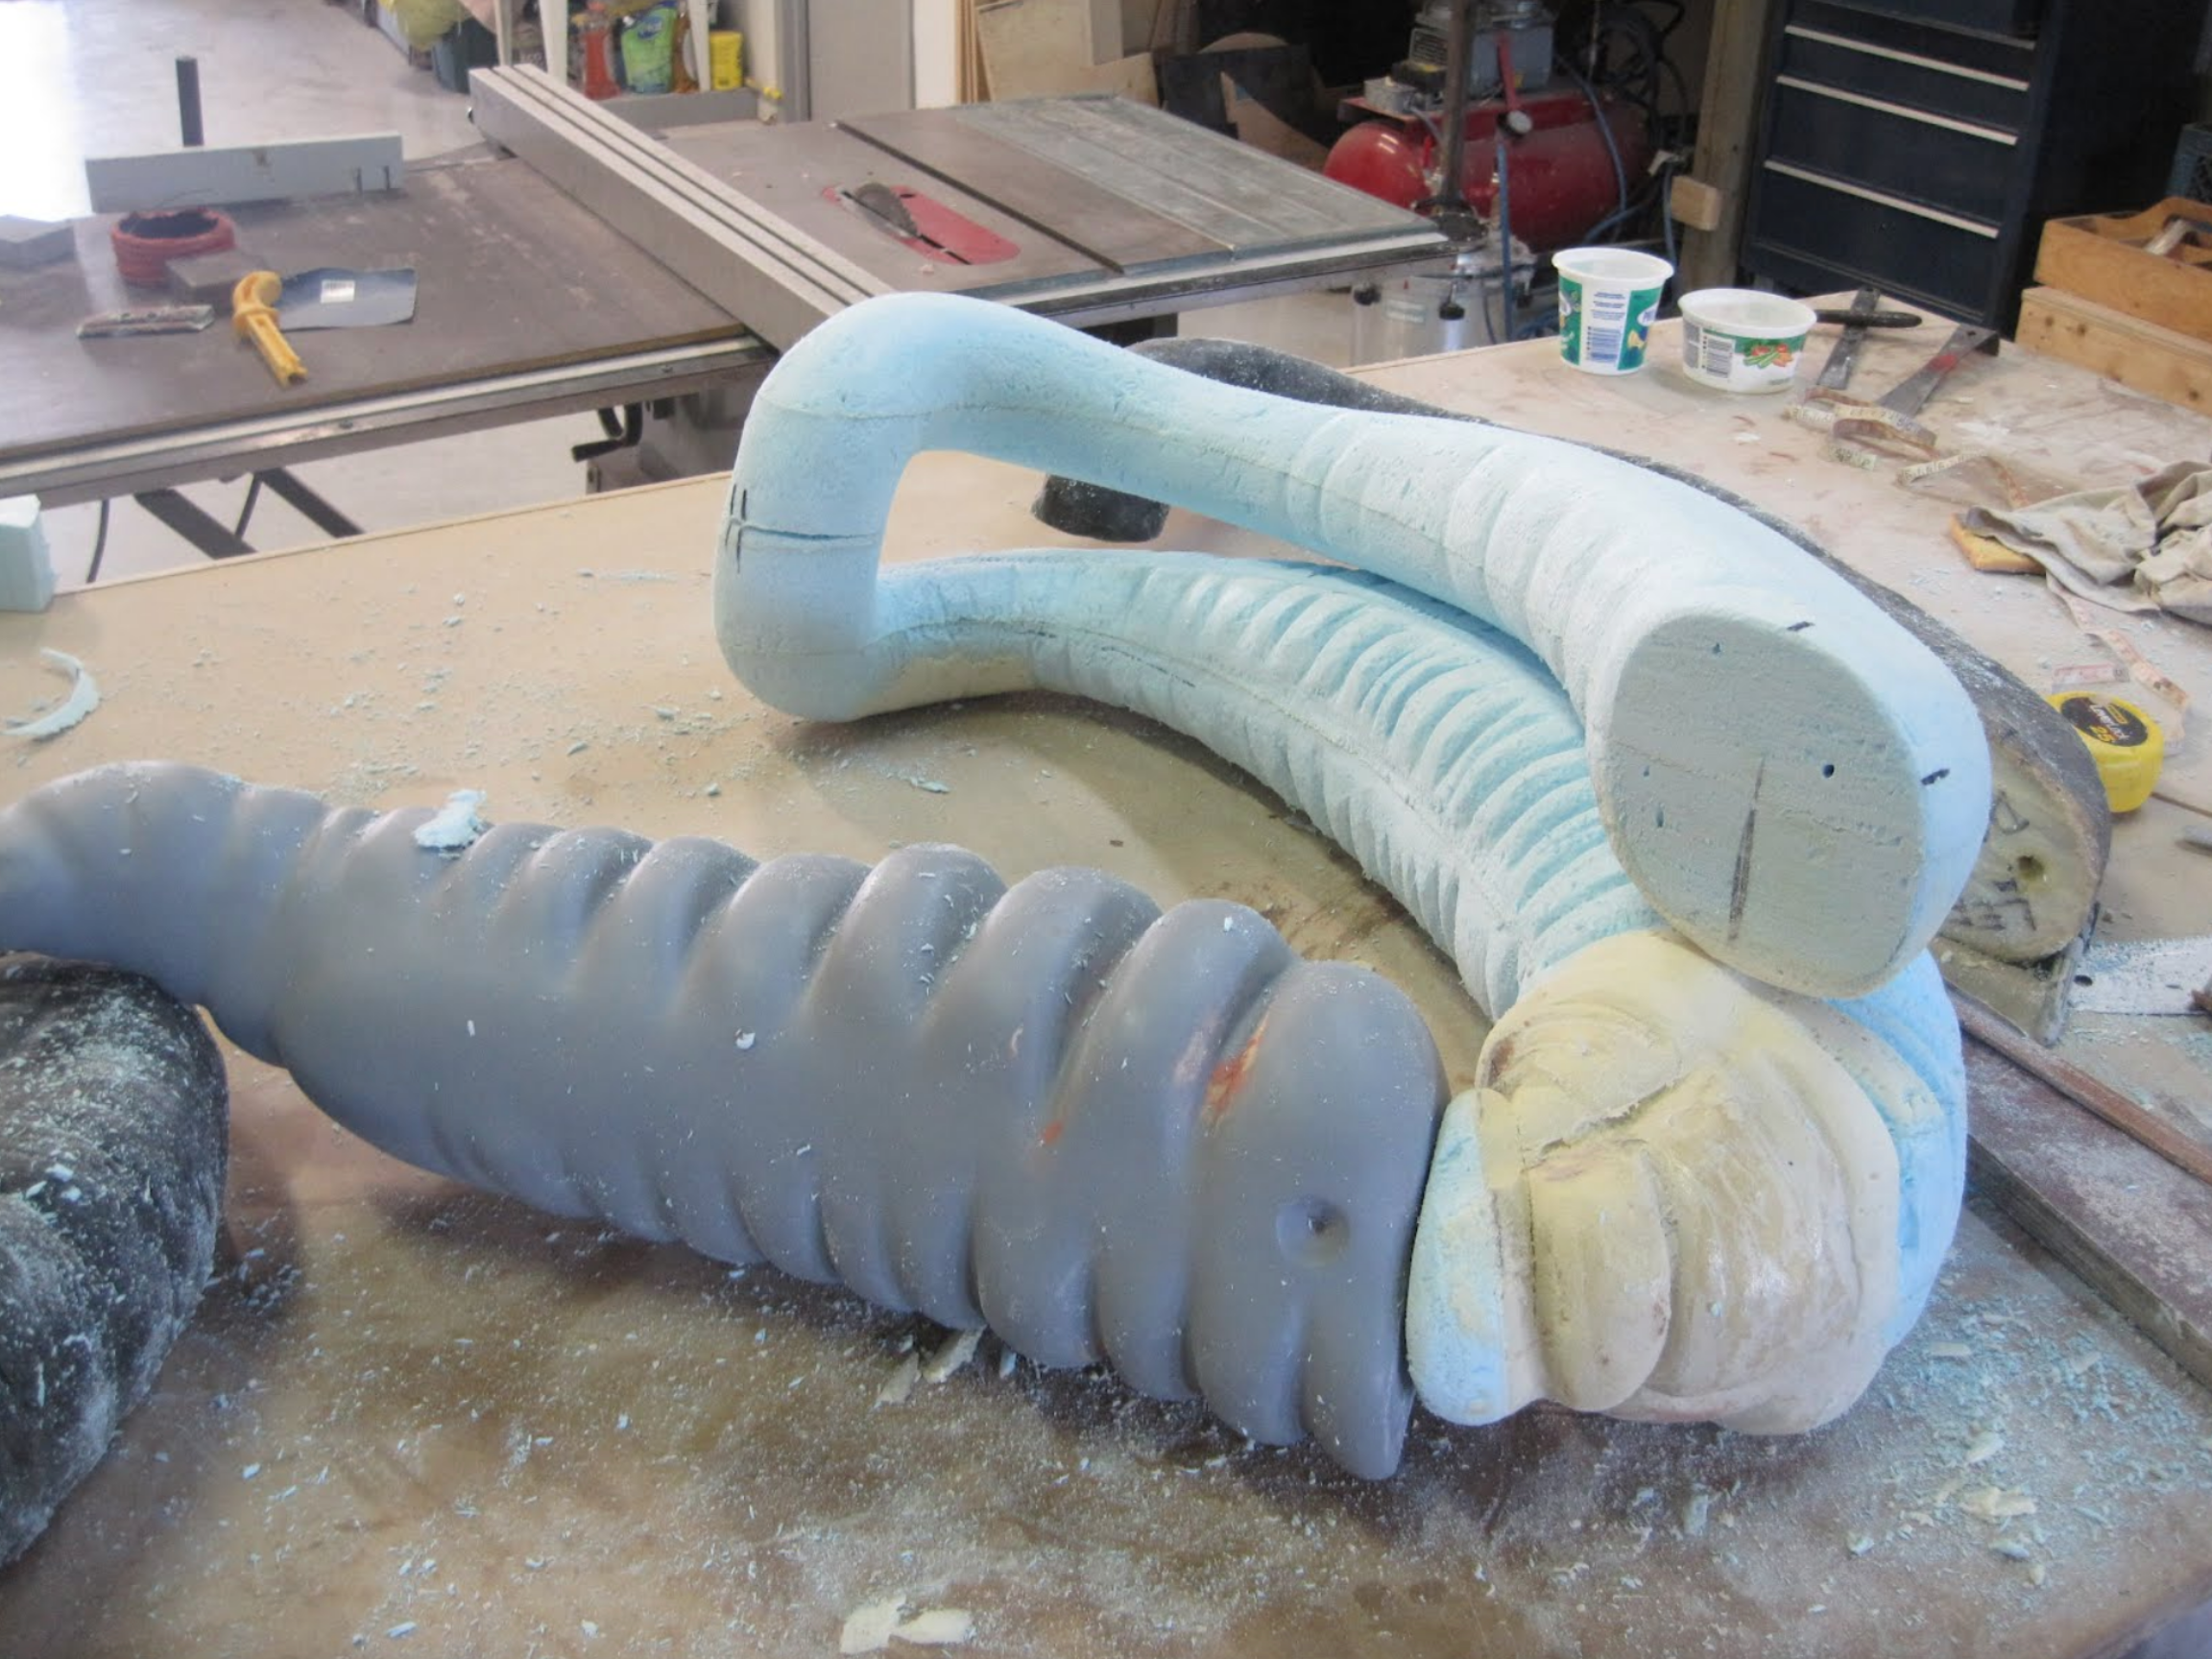  Here we are fitting the various components together as they are being sculpted. They will get an extremely smooth surface applied to them that will give a smooth realistic feel for the inflatable colon pieces. Sculptures of the transverse colon and 